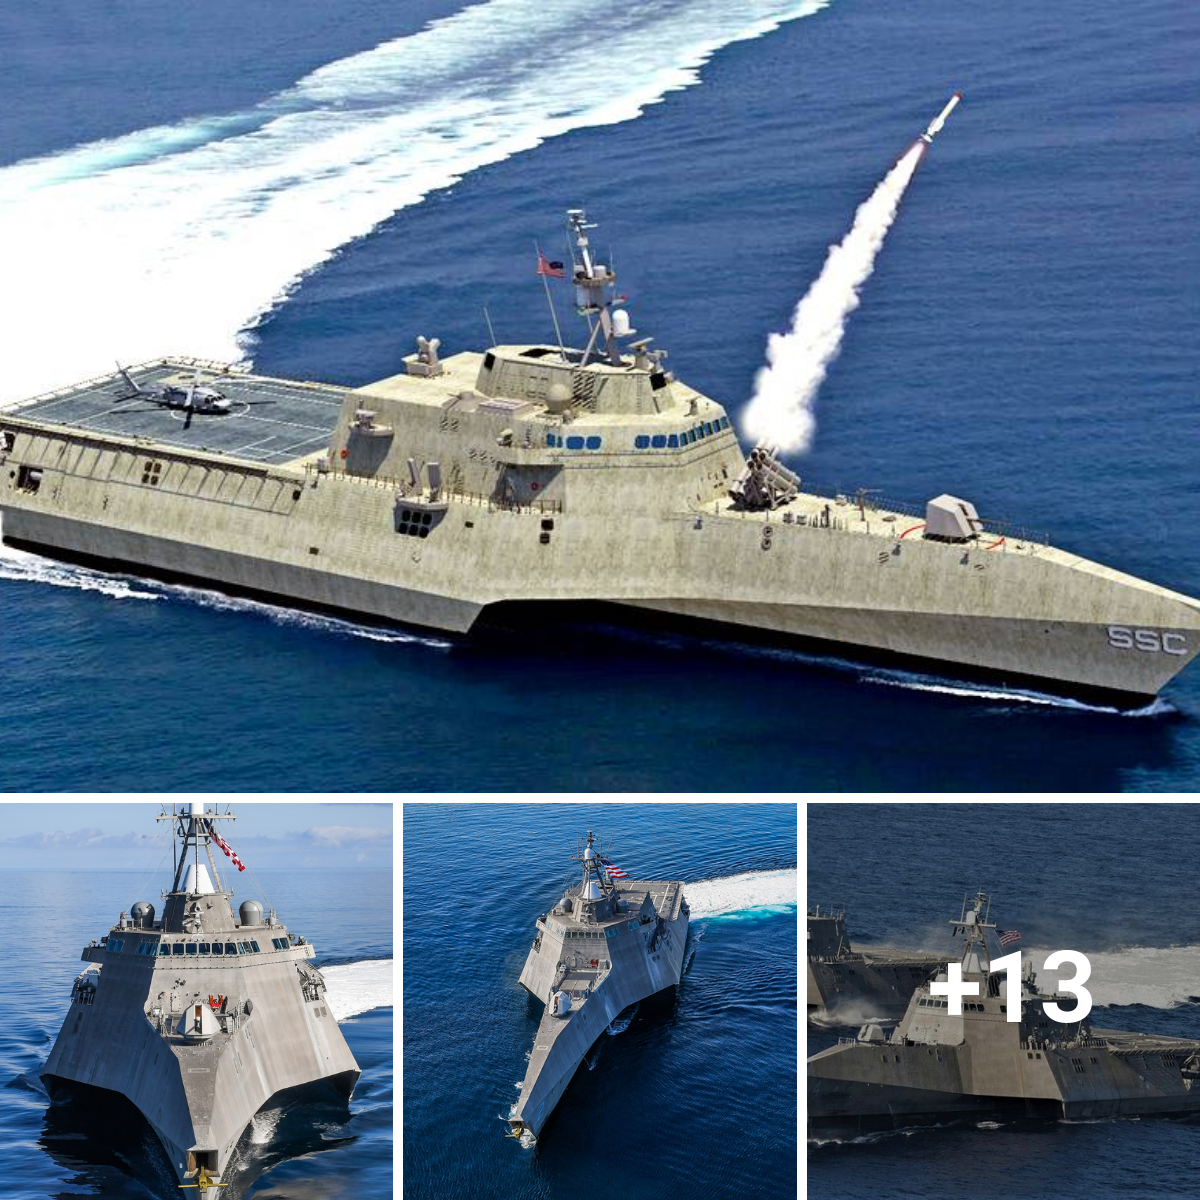 The US Unveils $600 Million LCS Independence: A Trio of Mighty wагѕһірѕ